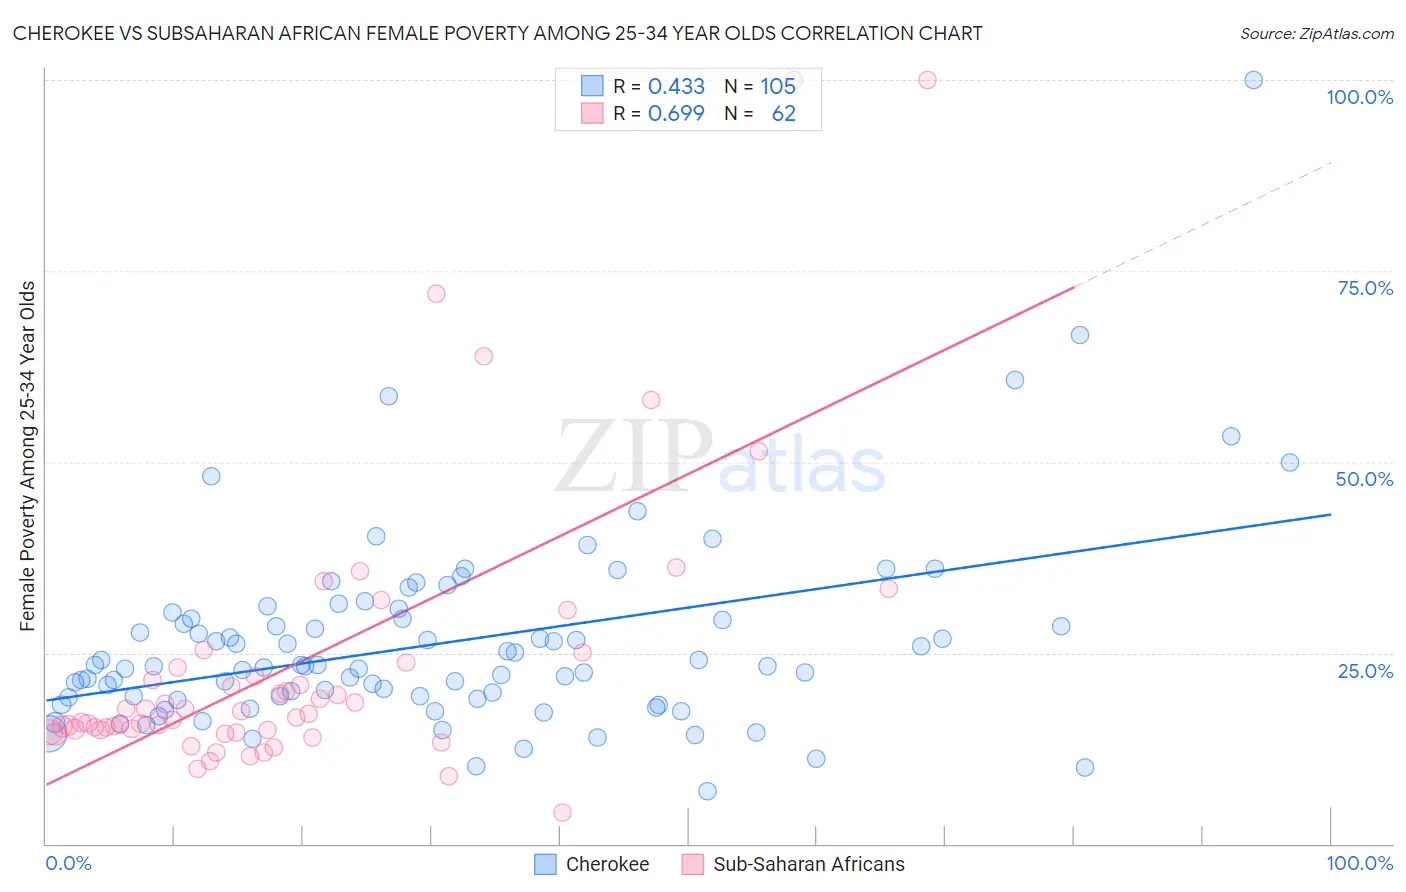 Cherokee vs Subsaharan African Female Poverty Among 25-34 Year Olds